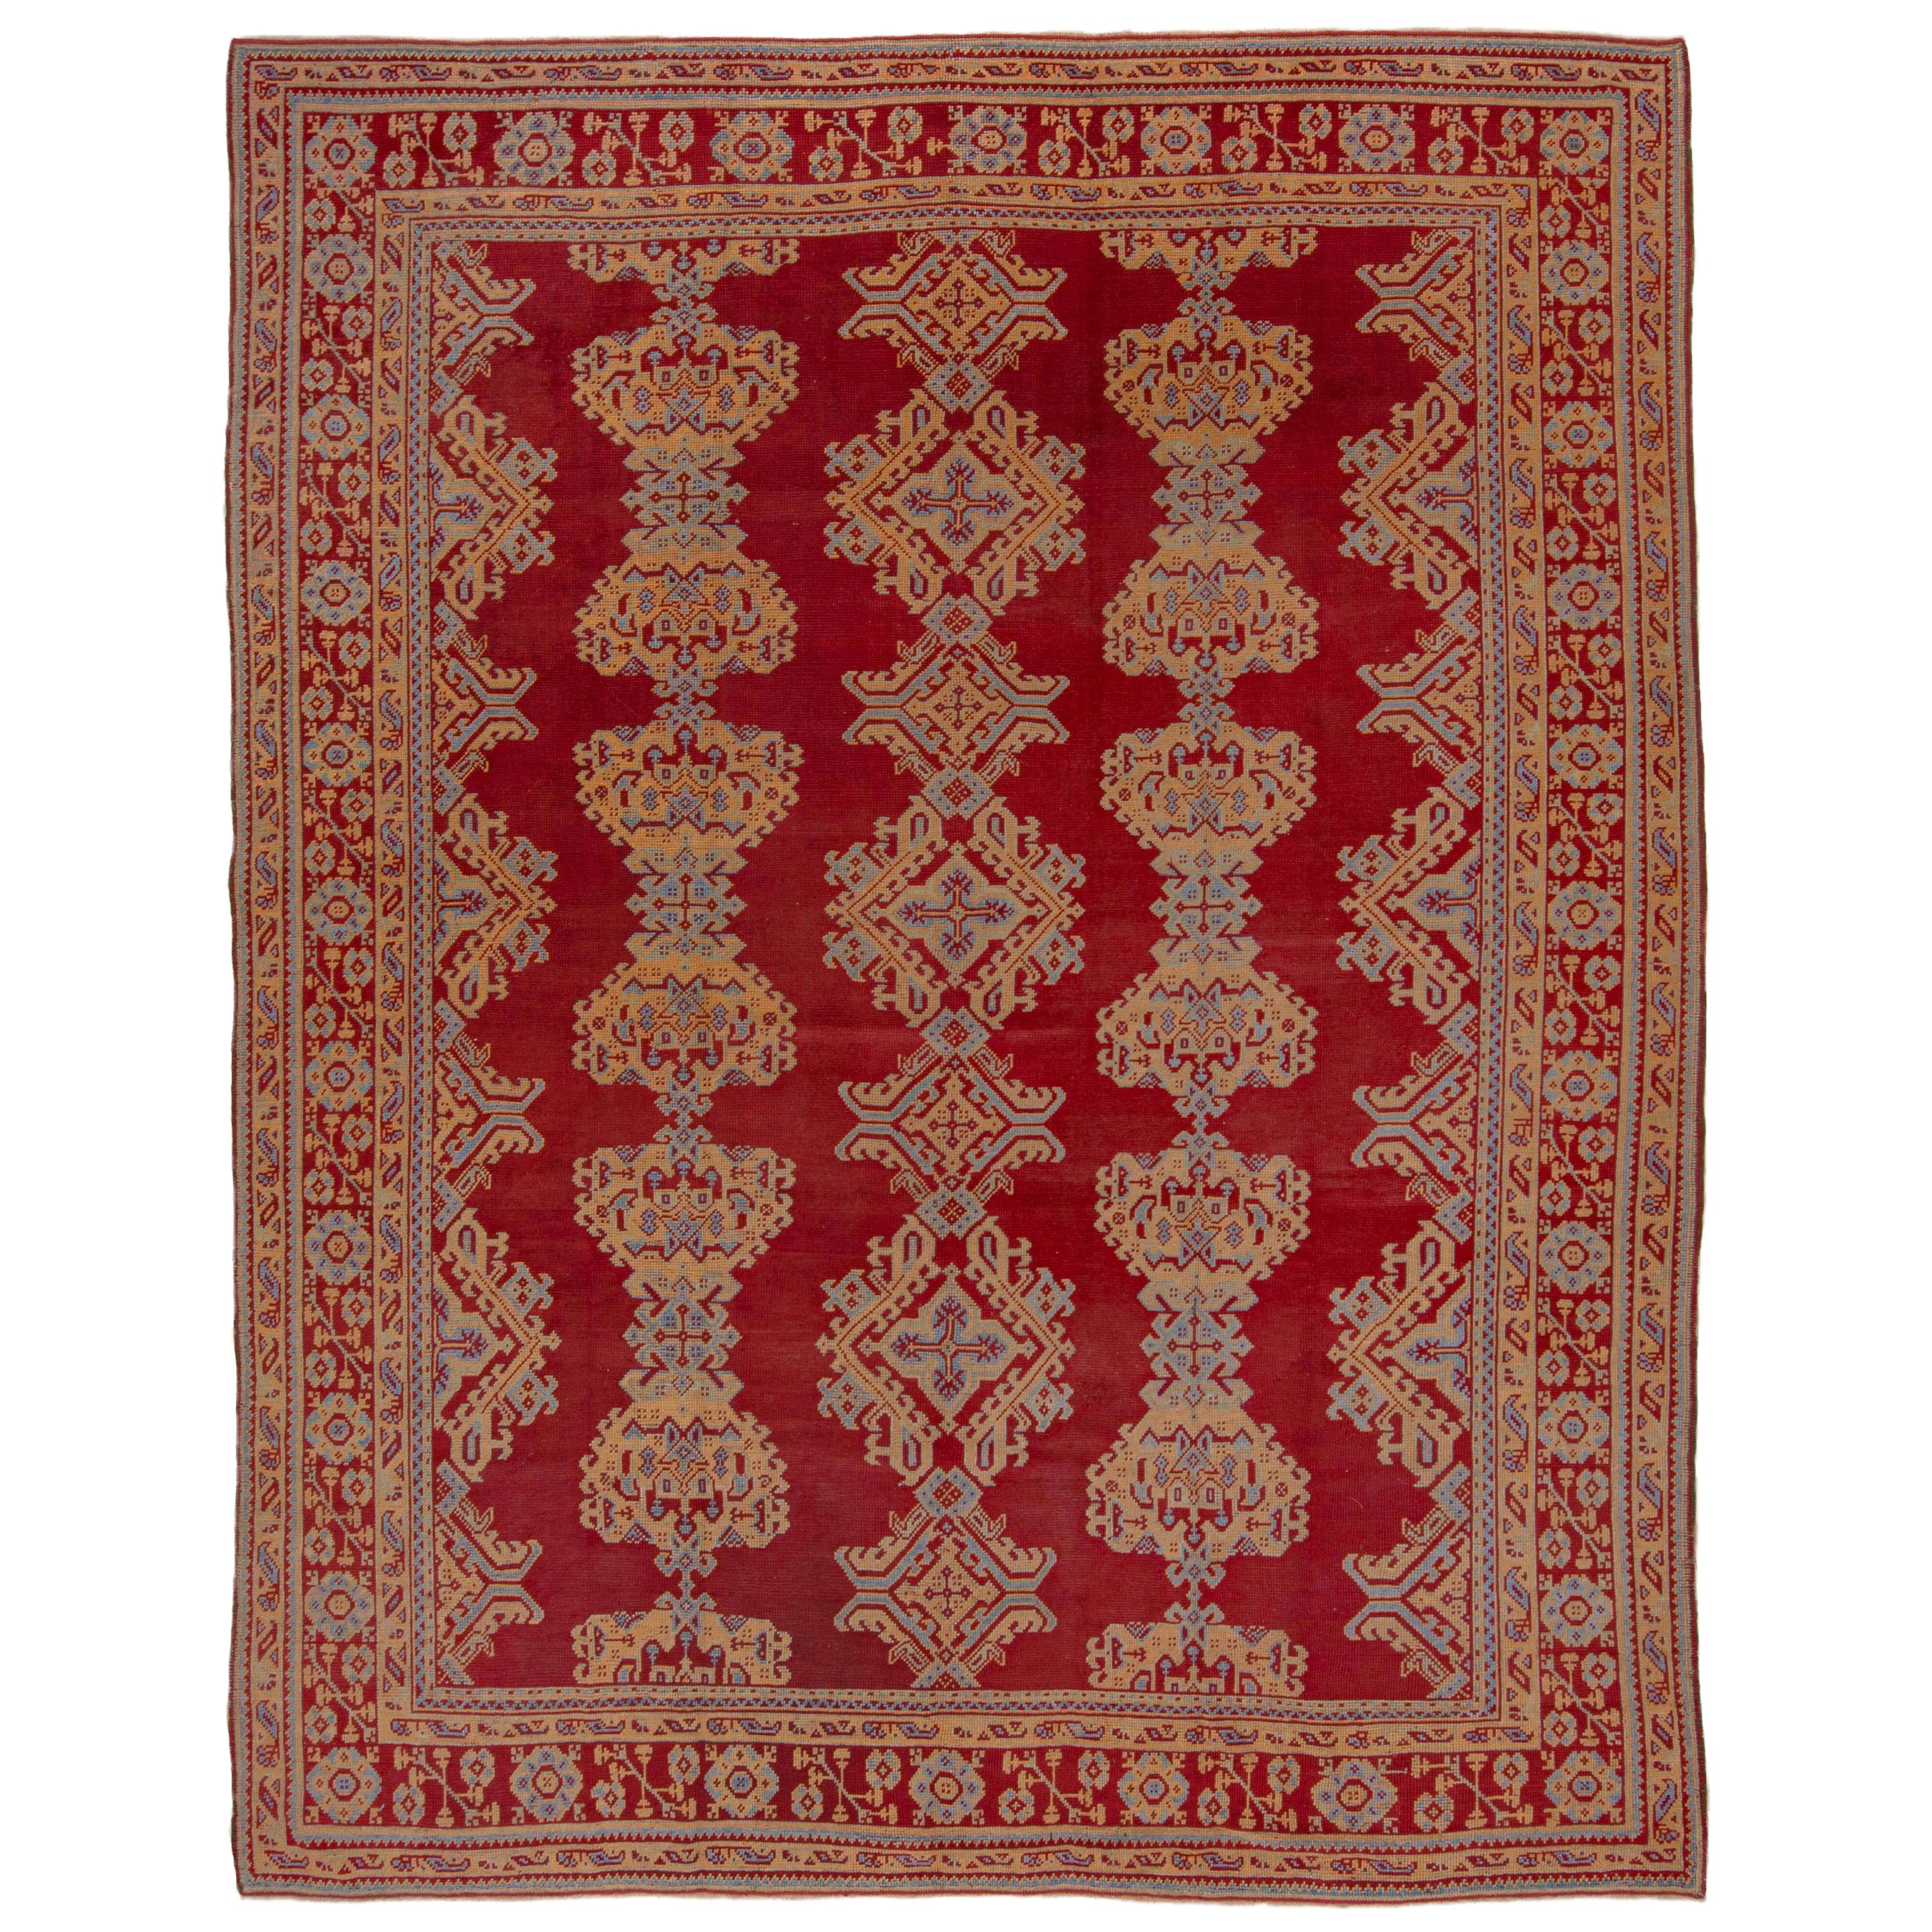 Antique Red Oushak Rug with Orange & Blue Borders, Circa 1920s For Sale